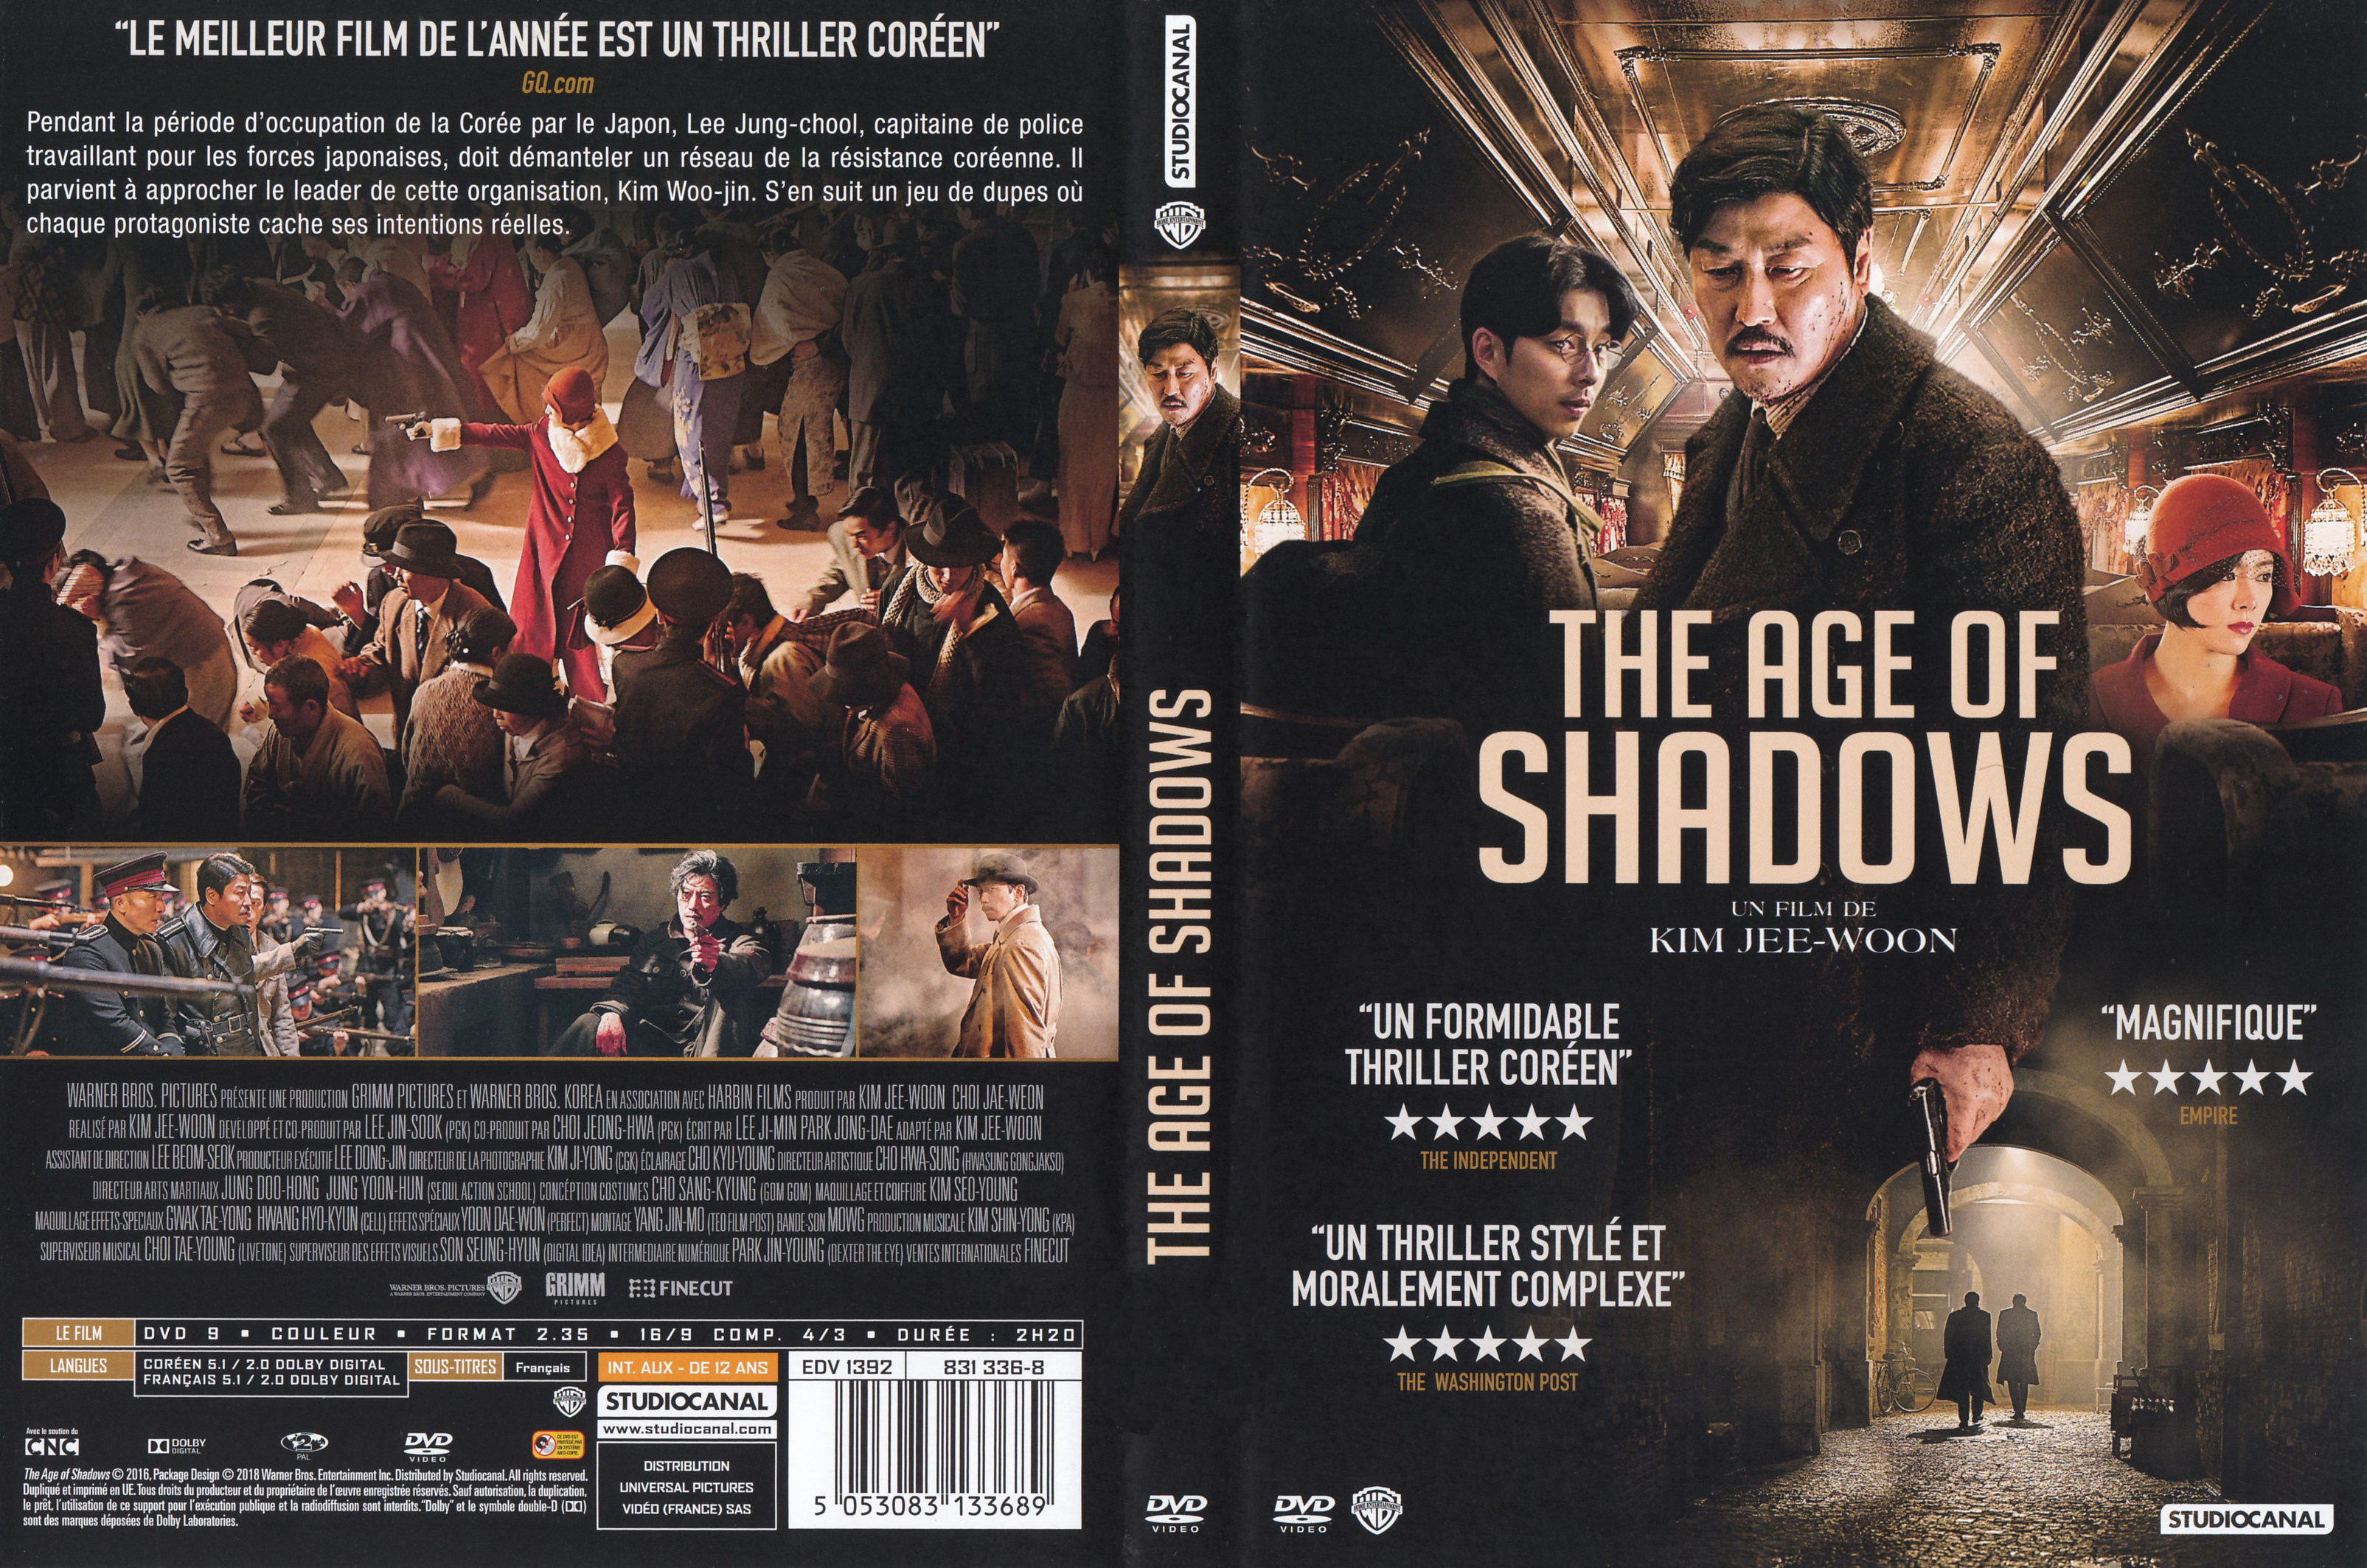 Jaquette DVD The age of shadows